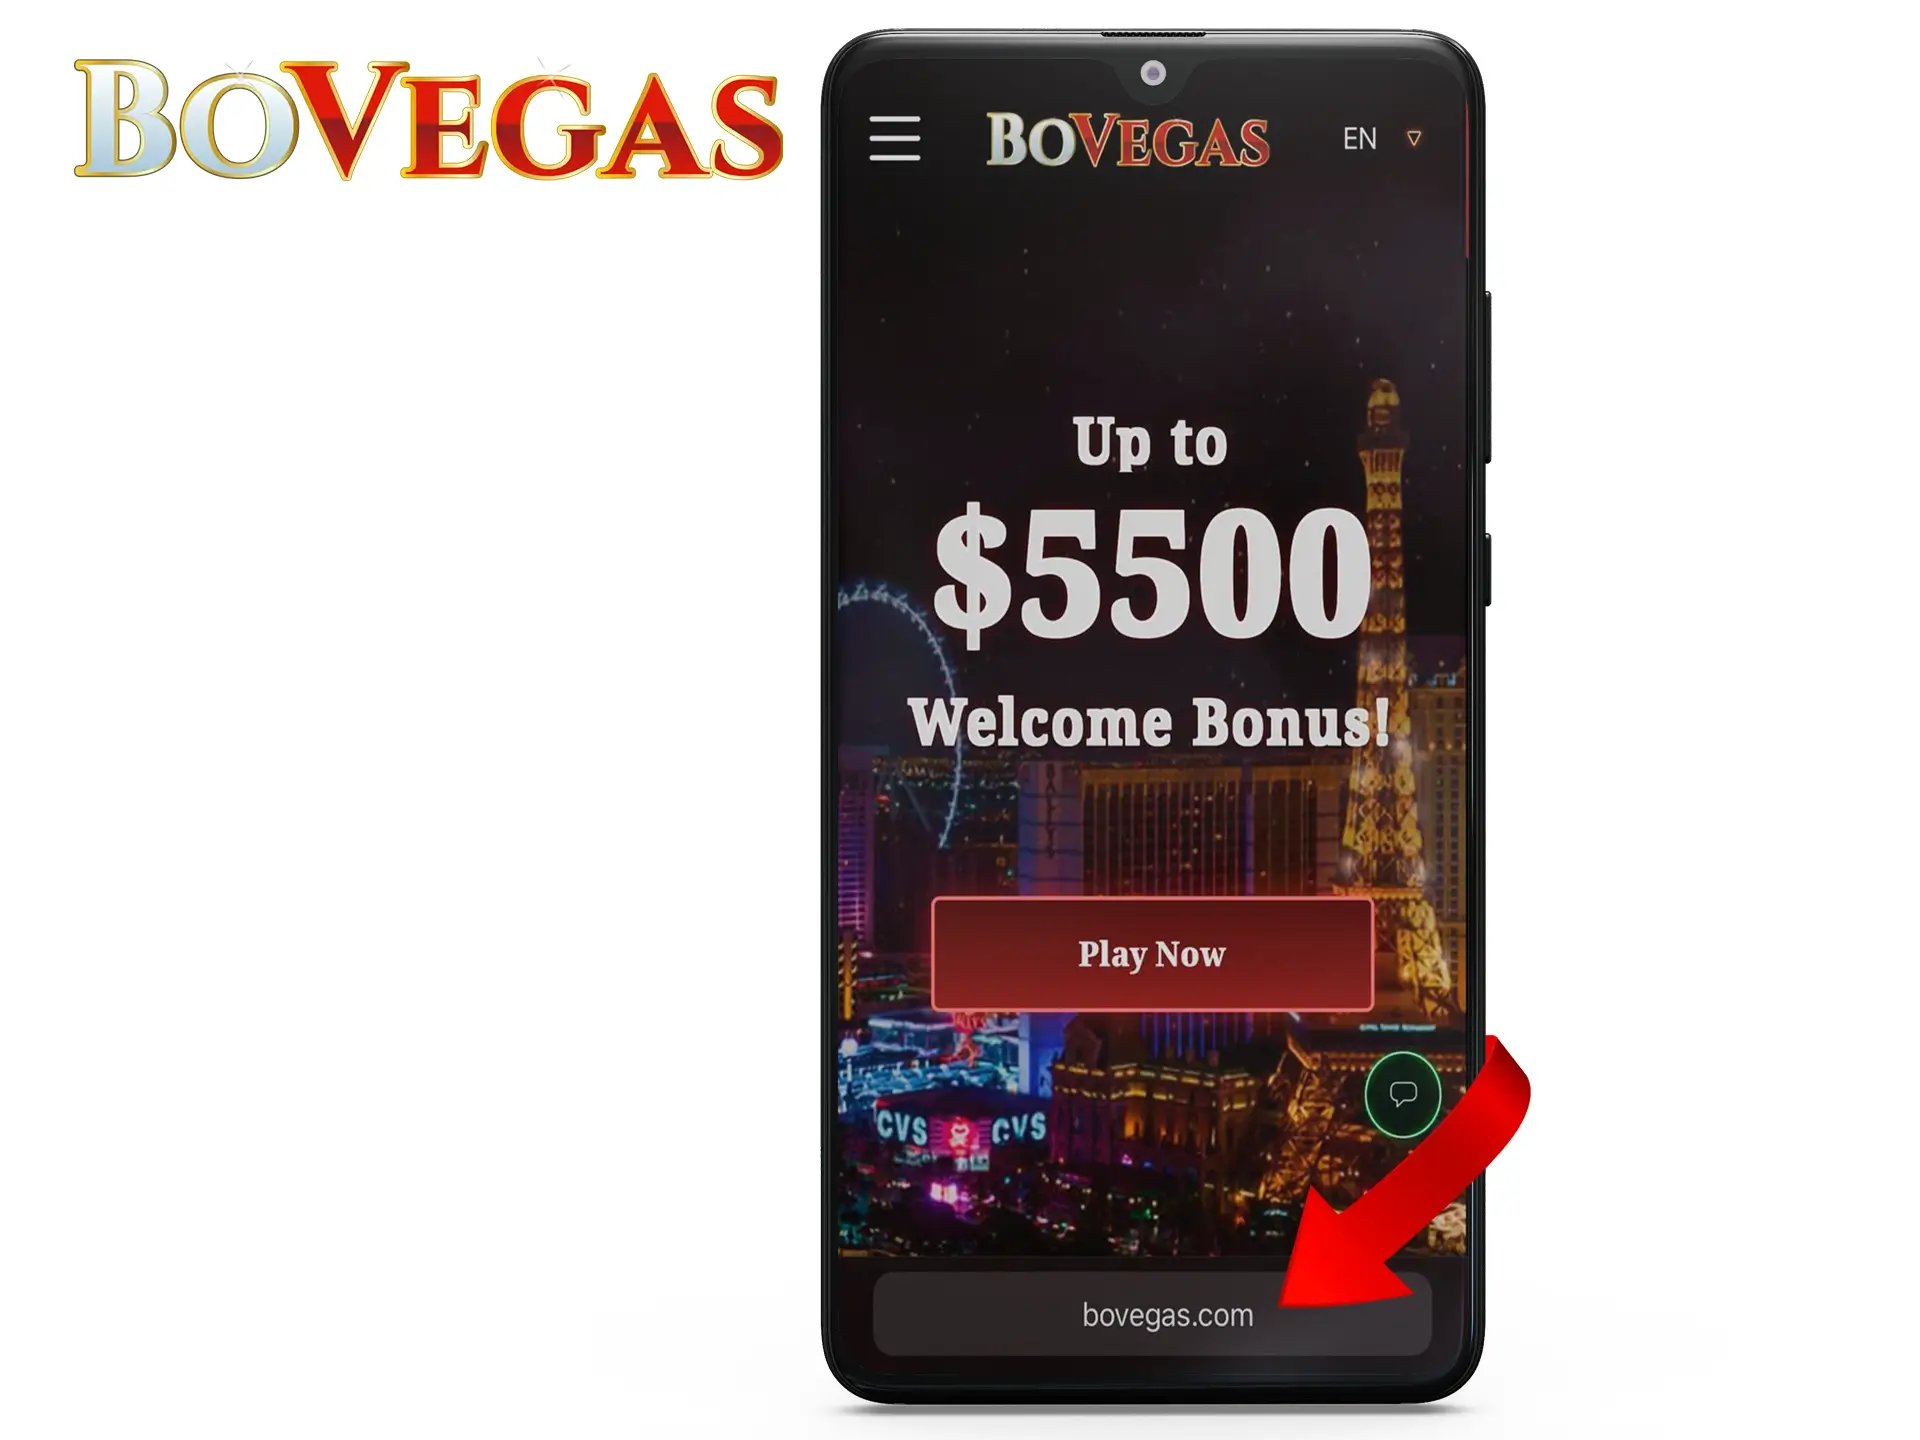 Open the BoVegas website in any web browser on your Android device.